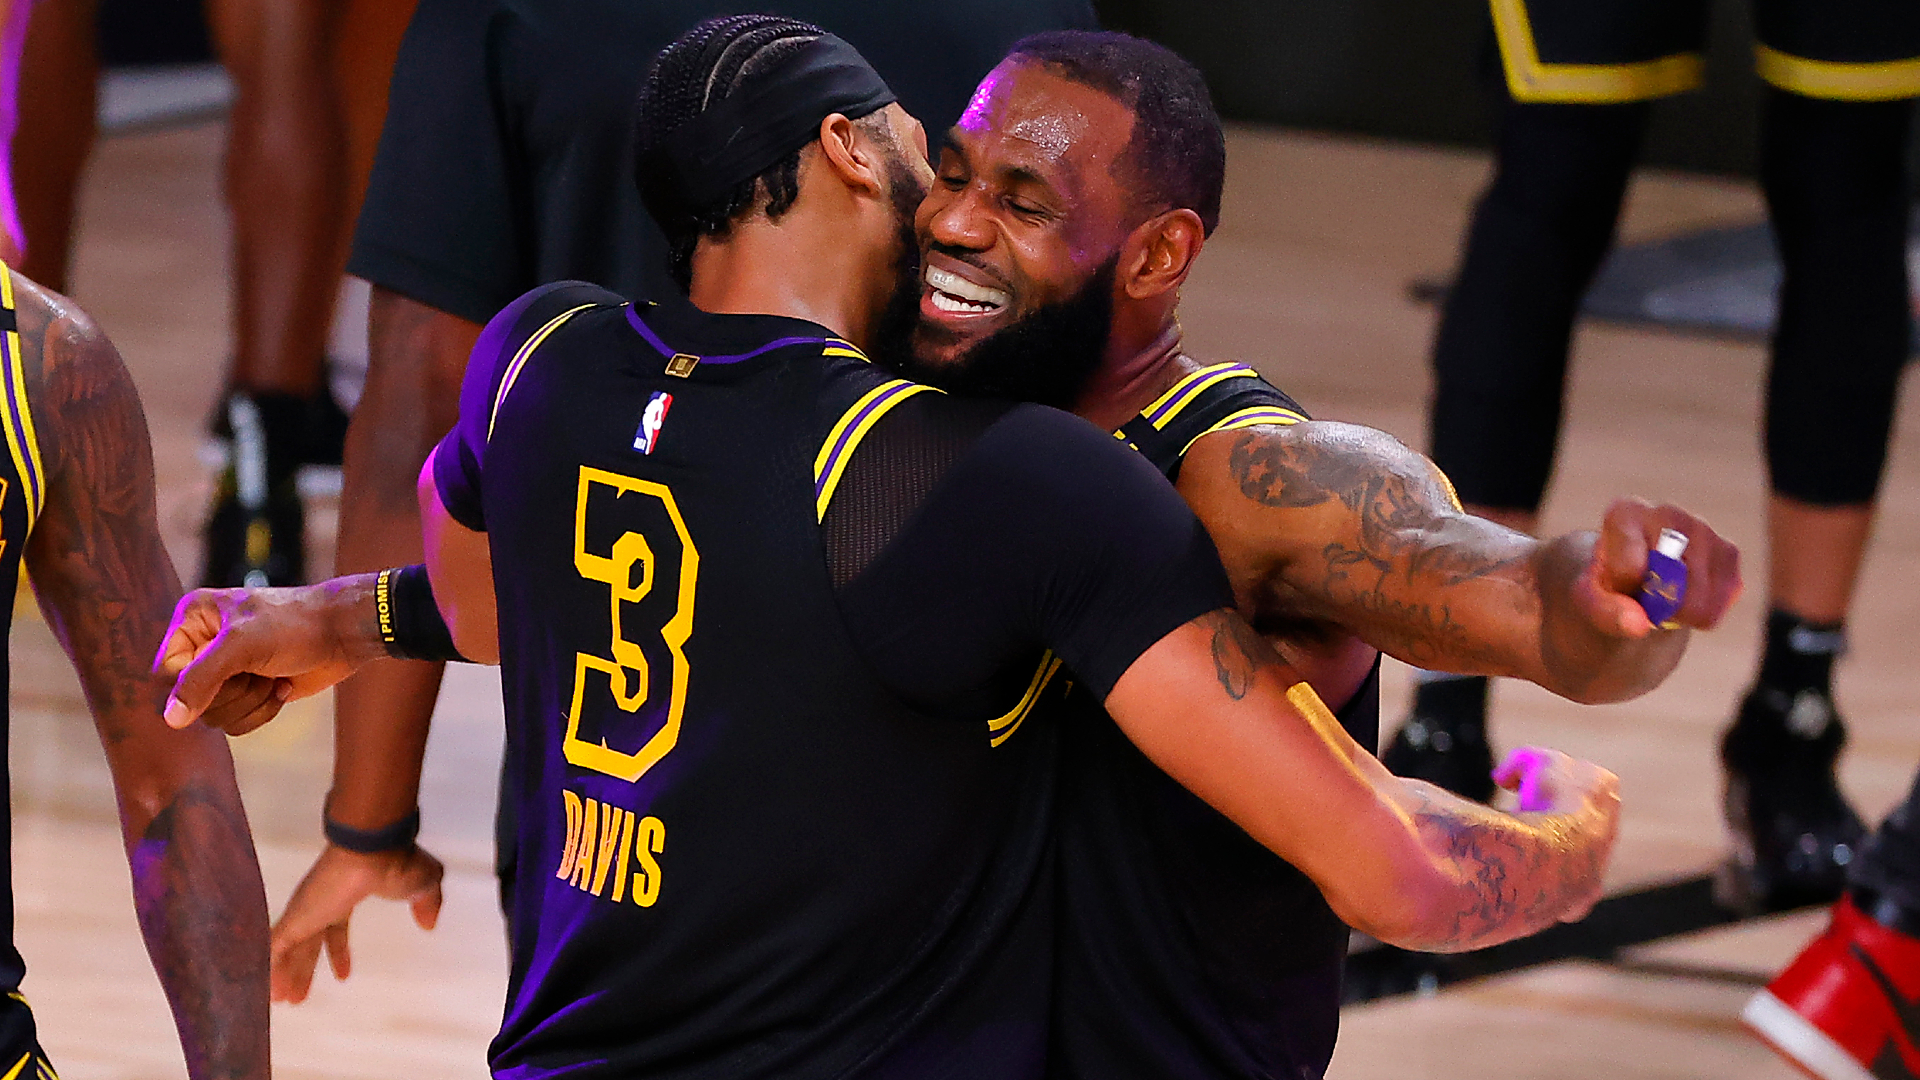 Los Angeles Lakers star LeBron James praised Anthony Davis' belief after his game-winner in the NBA playoffs.